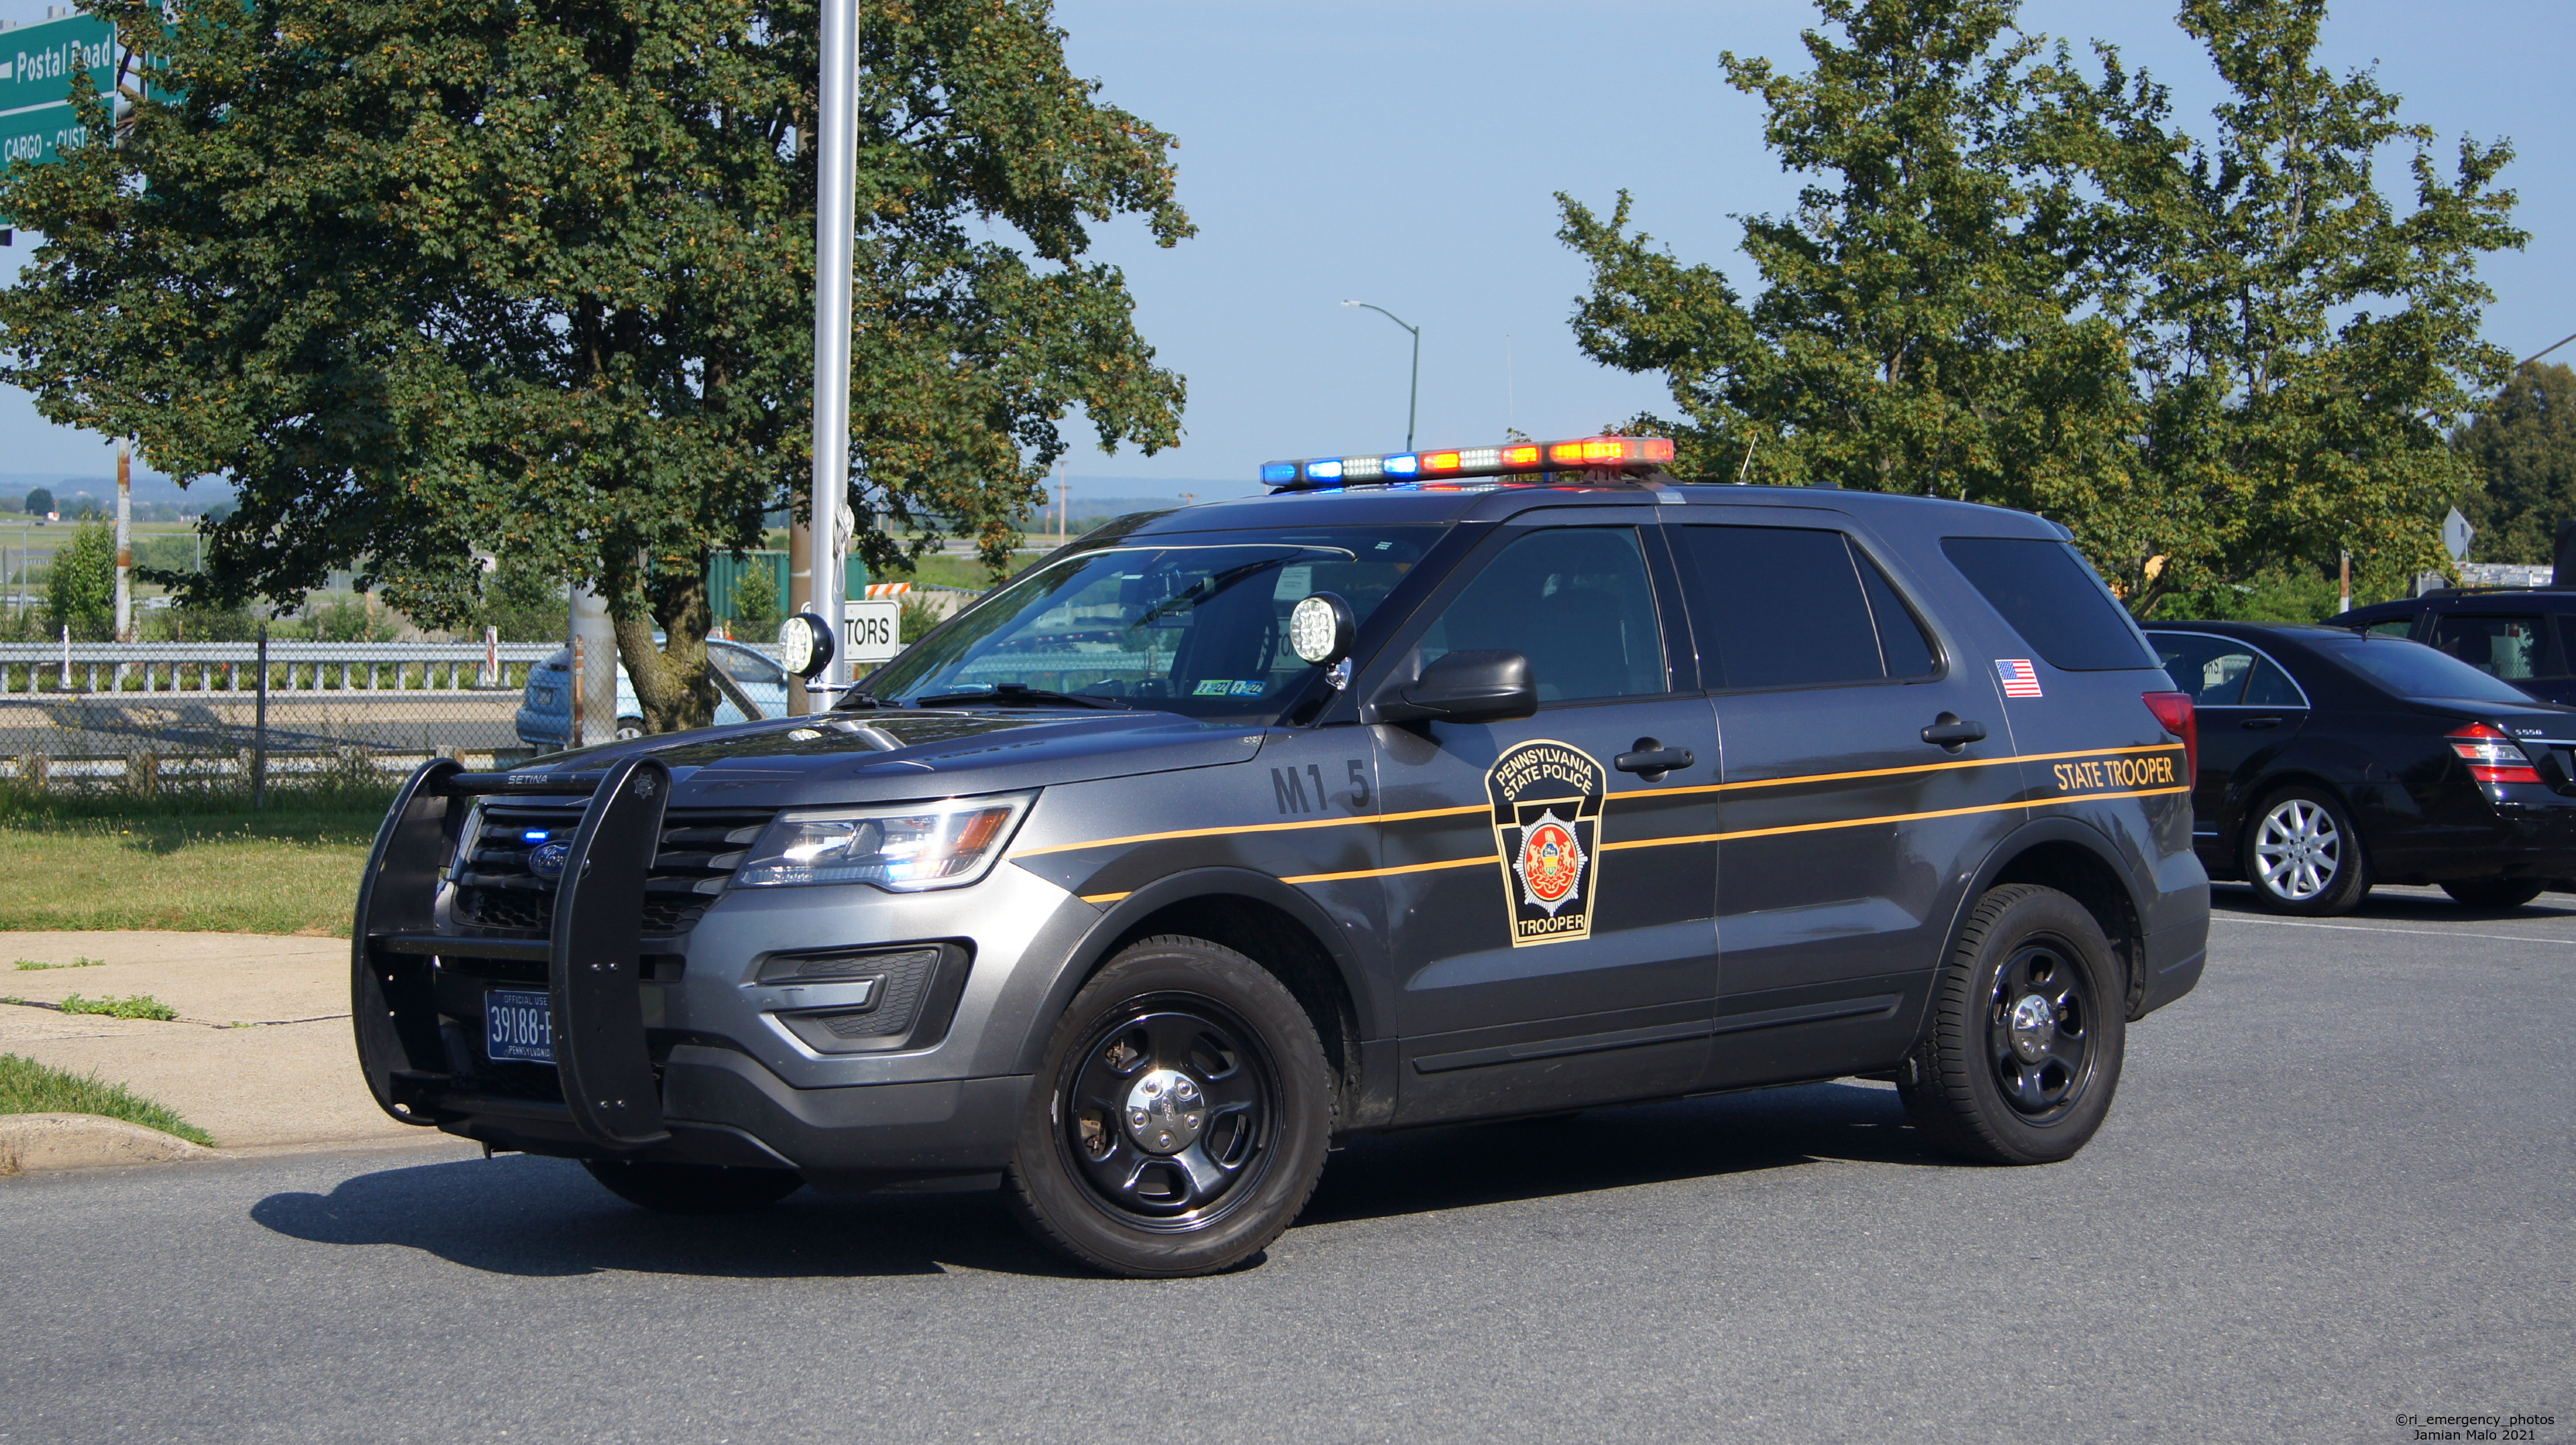 A photo  of Pennsylvania State Police
            Cruiser M1 5, a 2016-2019 Ford Police Interceptor Utility             taken by Jamian Malo